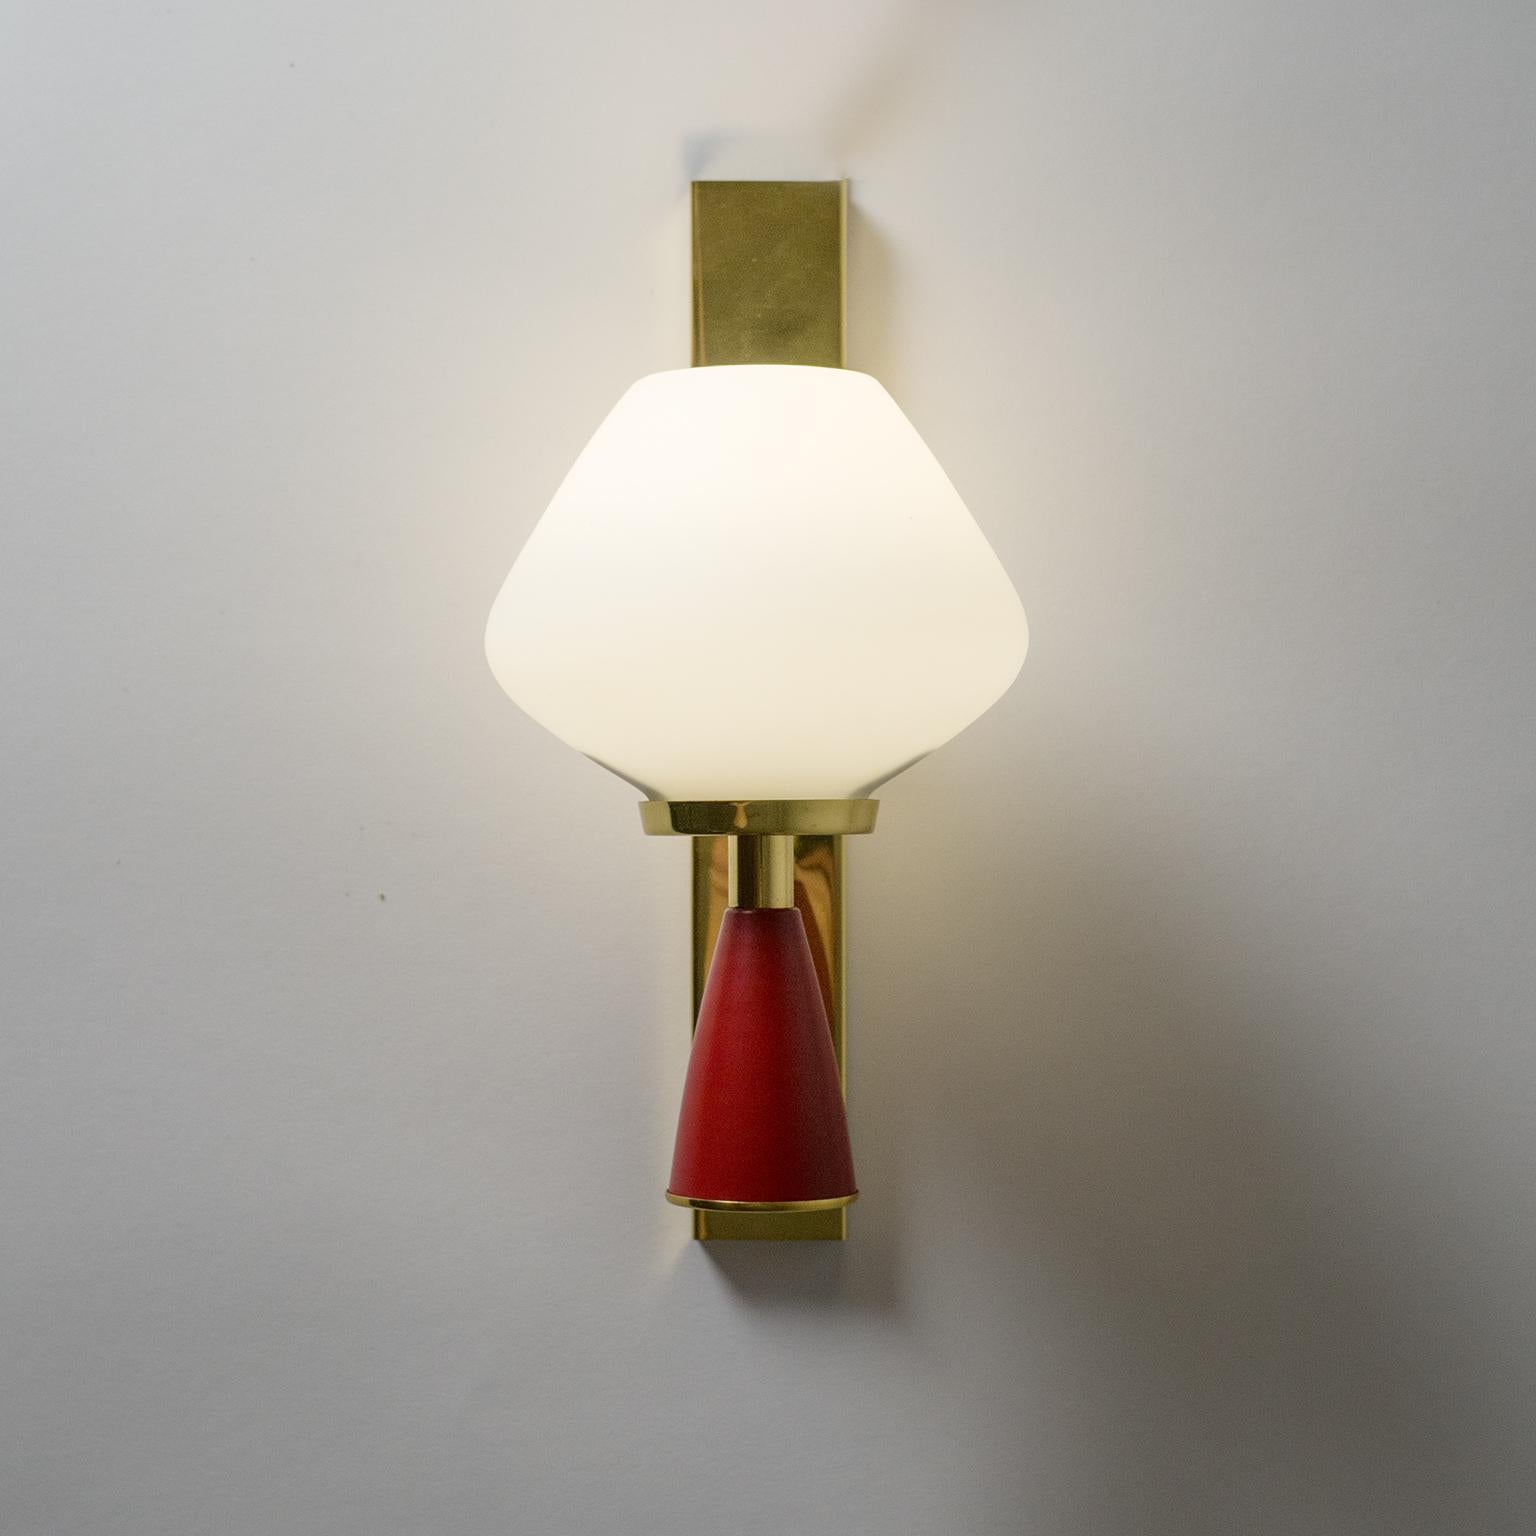 Italian Satin Glass Sconces, 1950s, Brass and Red 5